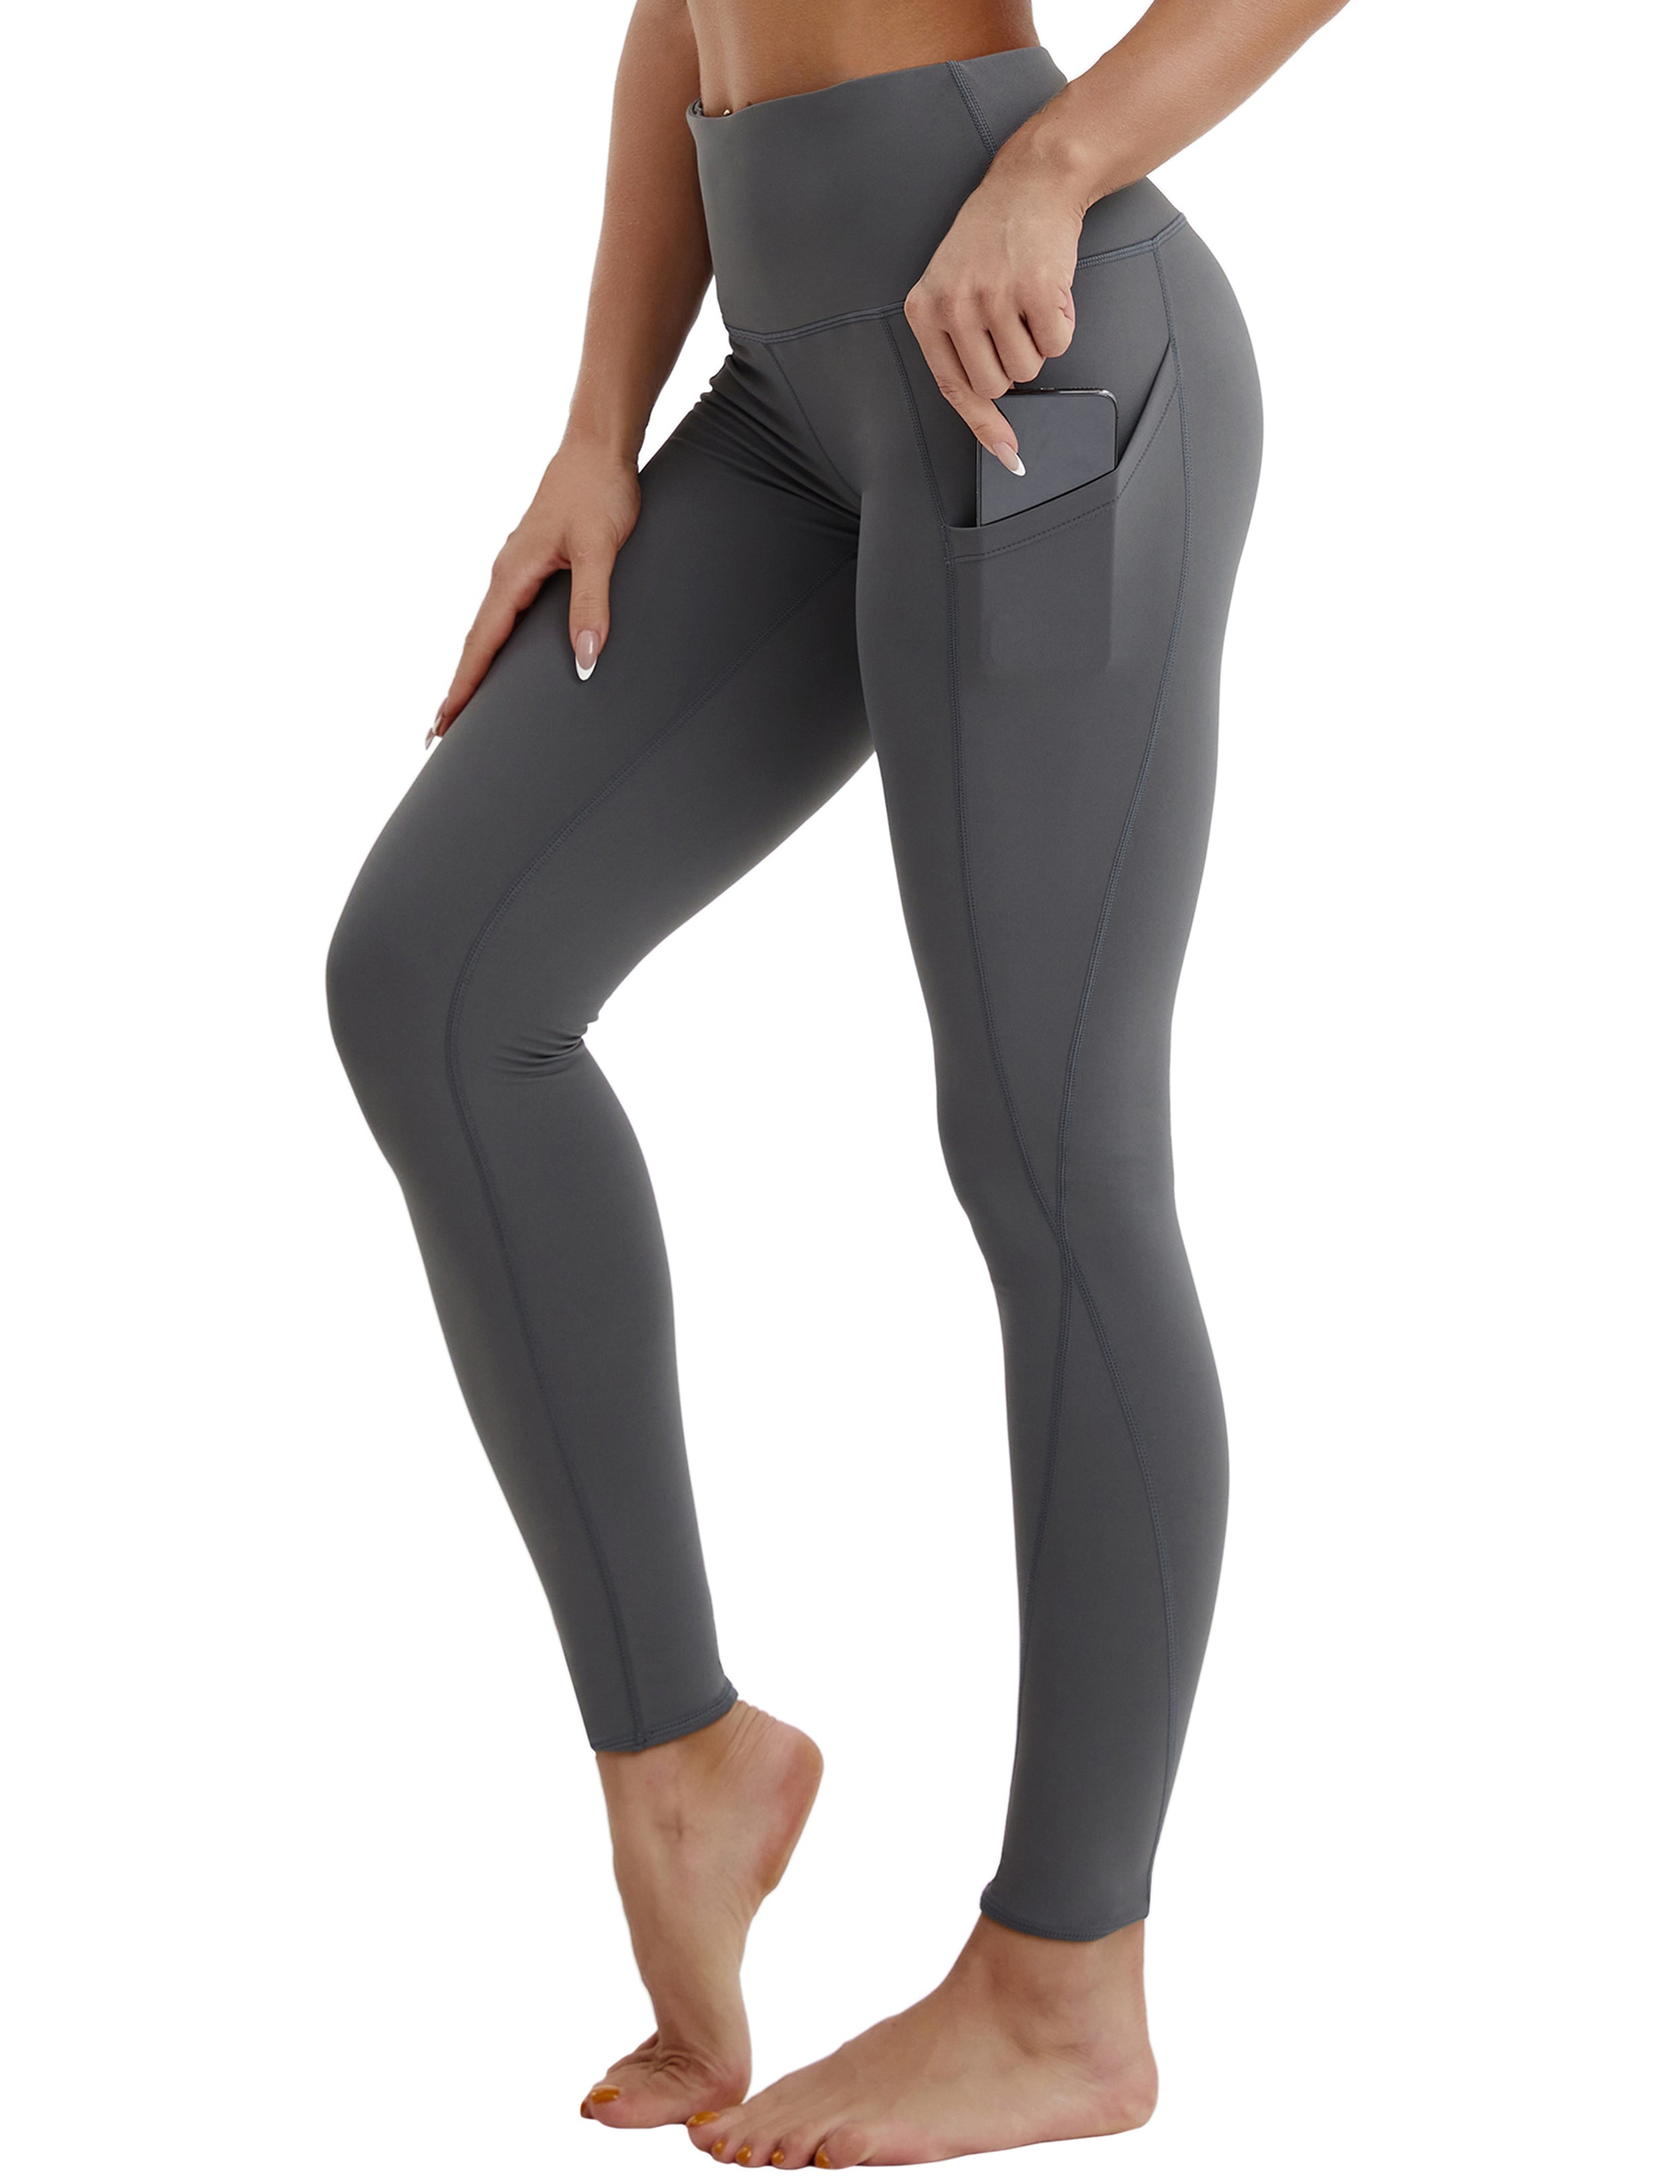 High Waist Side Pockets Golf Pants shadowcharcoal 75% Nylon, 25% Spandex Fabric doesn't attract lint easily 4-way stretch No see-through Moisture-wicking Tummy control Inner pocket